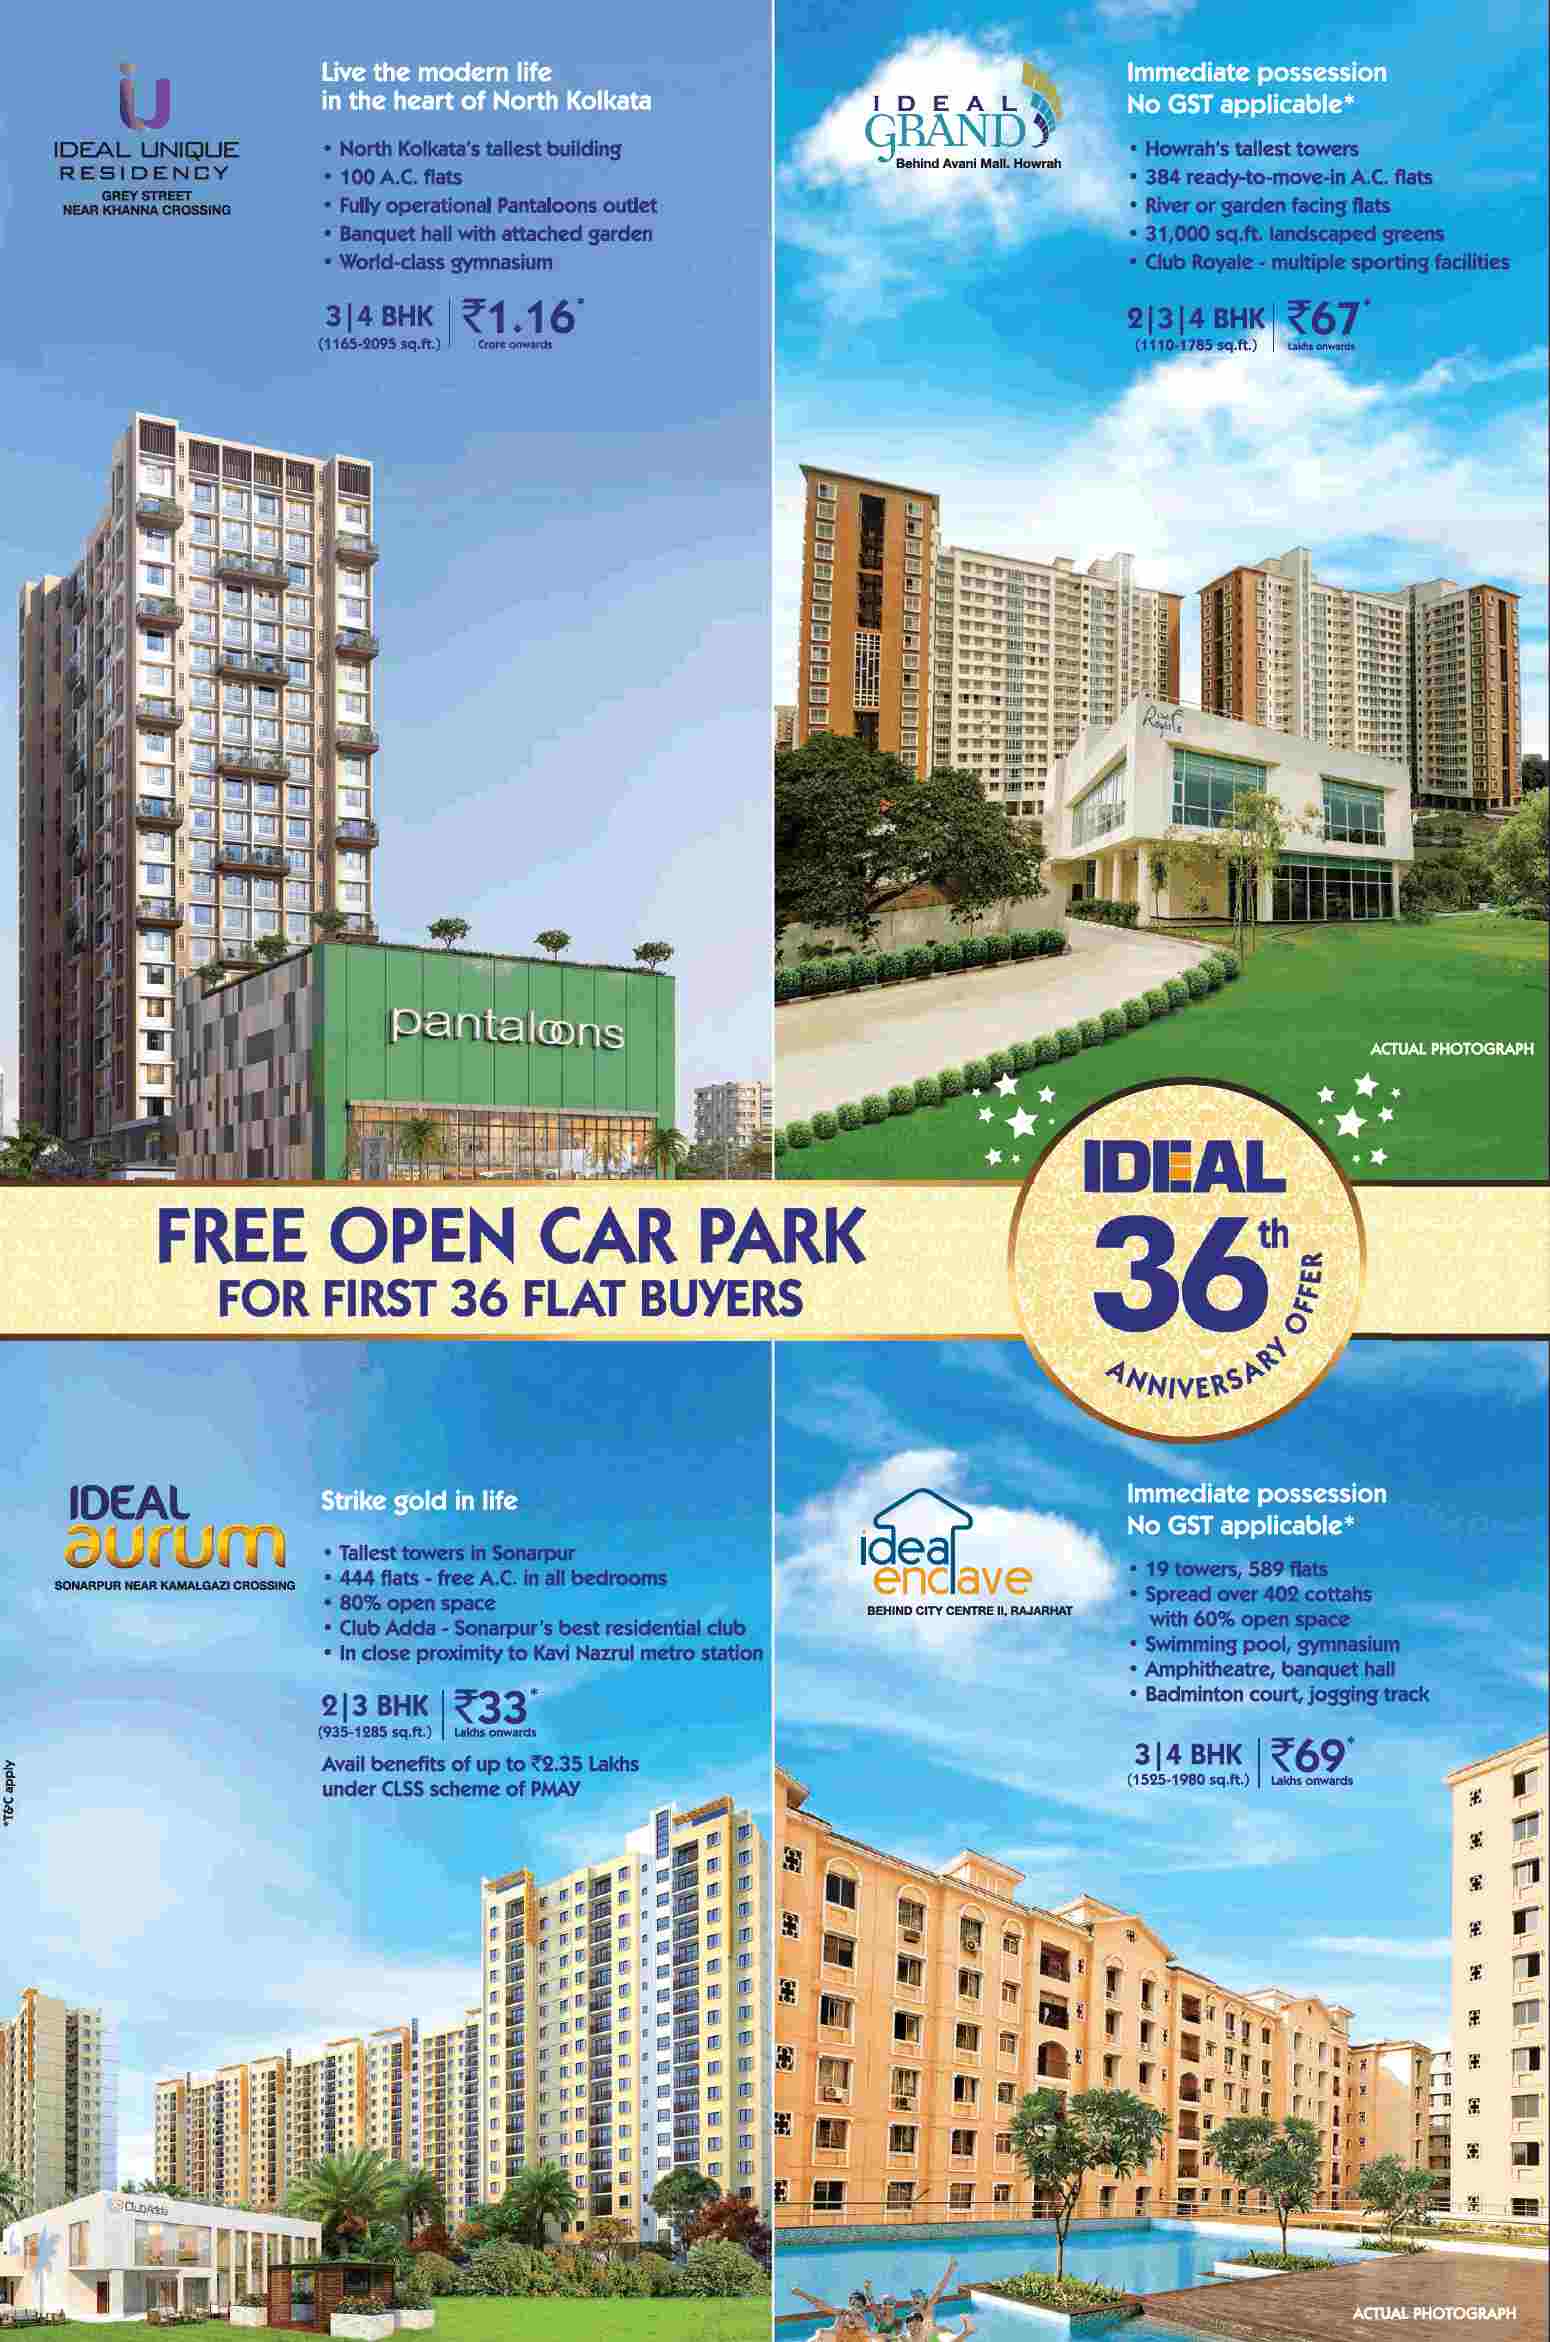 Avail the 36th-anniversary offer by investing at Ideal properties in Kolkata